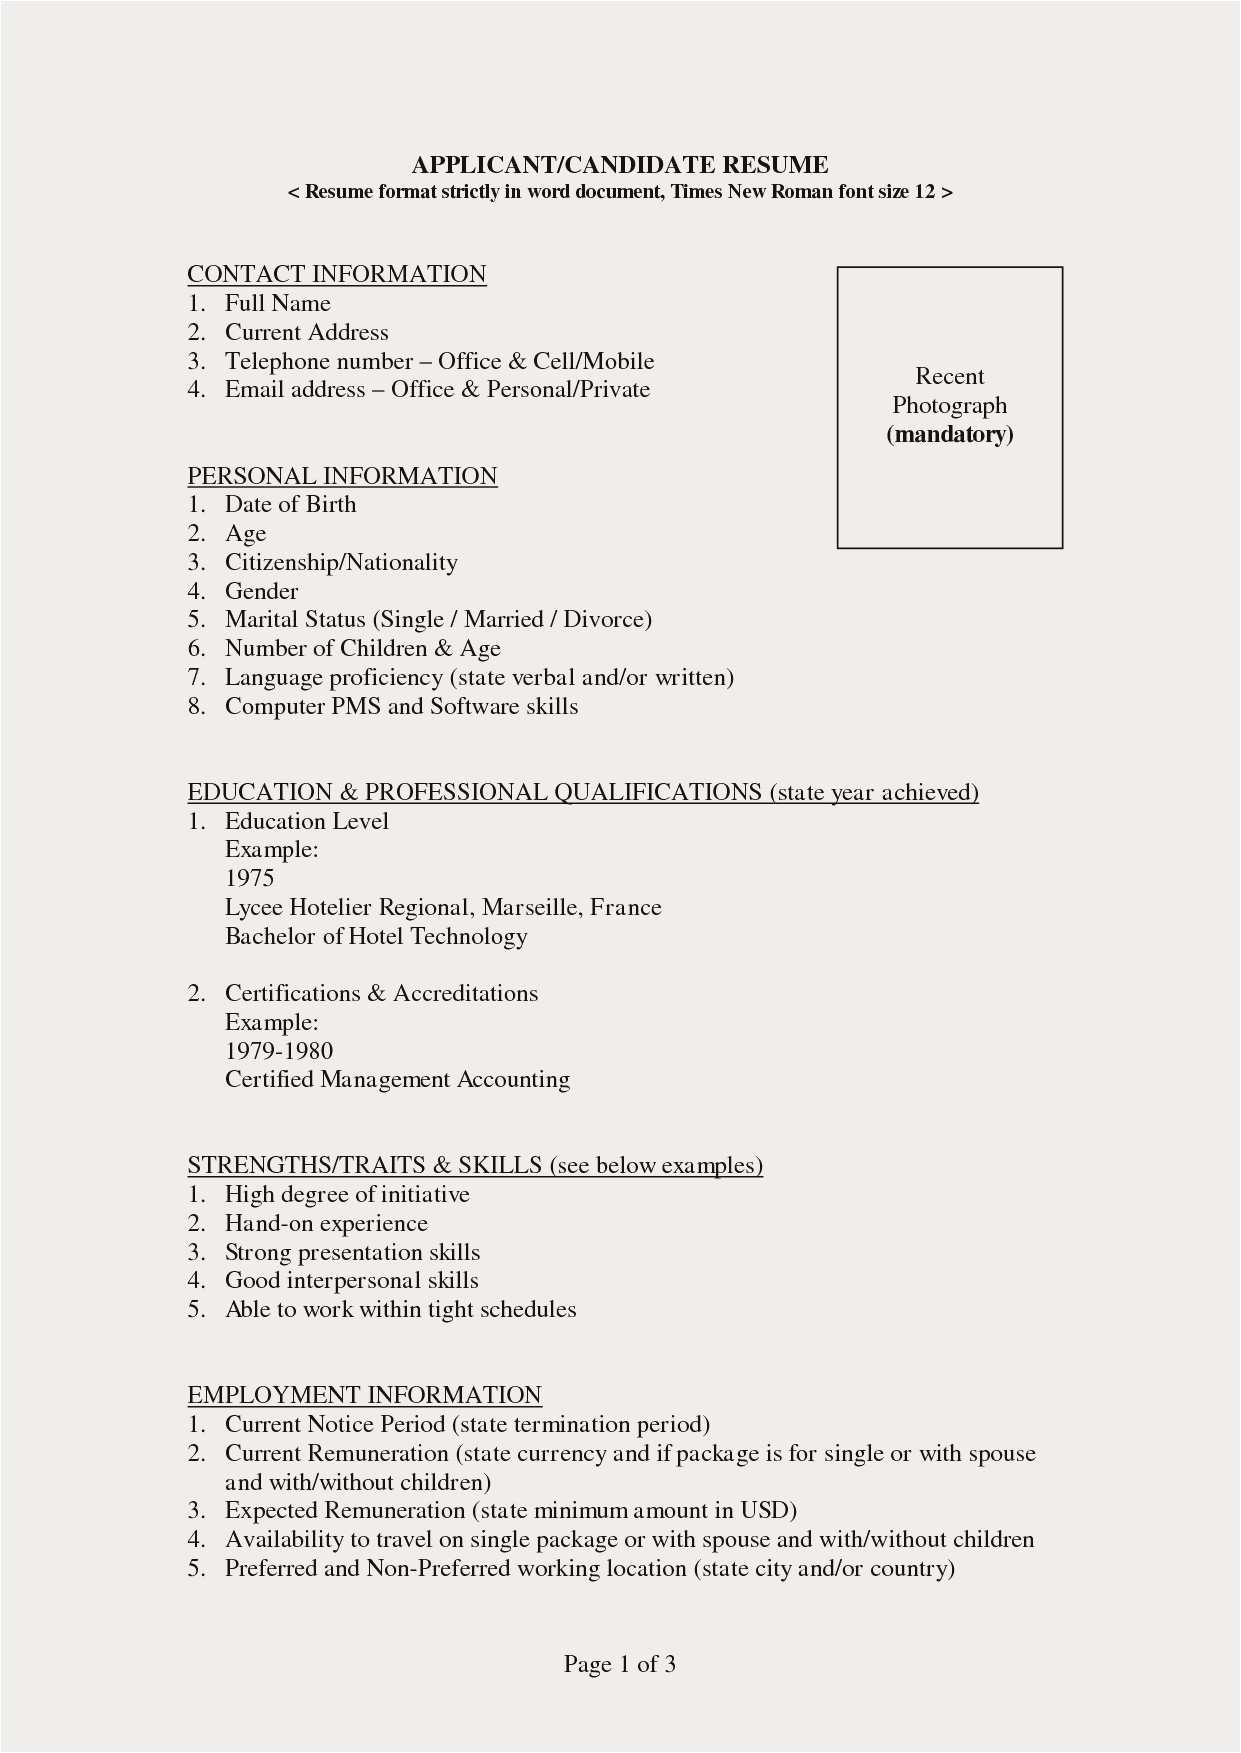 Resume Objective Example 120053 Full Medical Assistant Resume Objective Examples Resume For Doctors Fice resume objective example|wikiresume.com